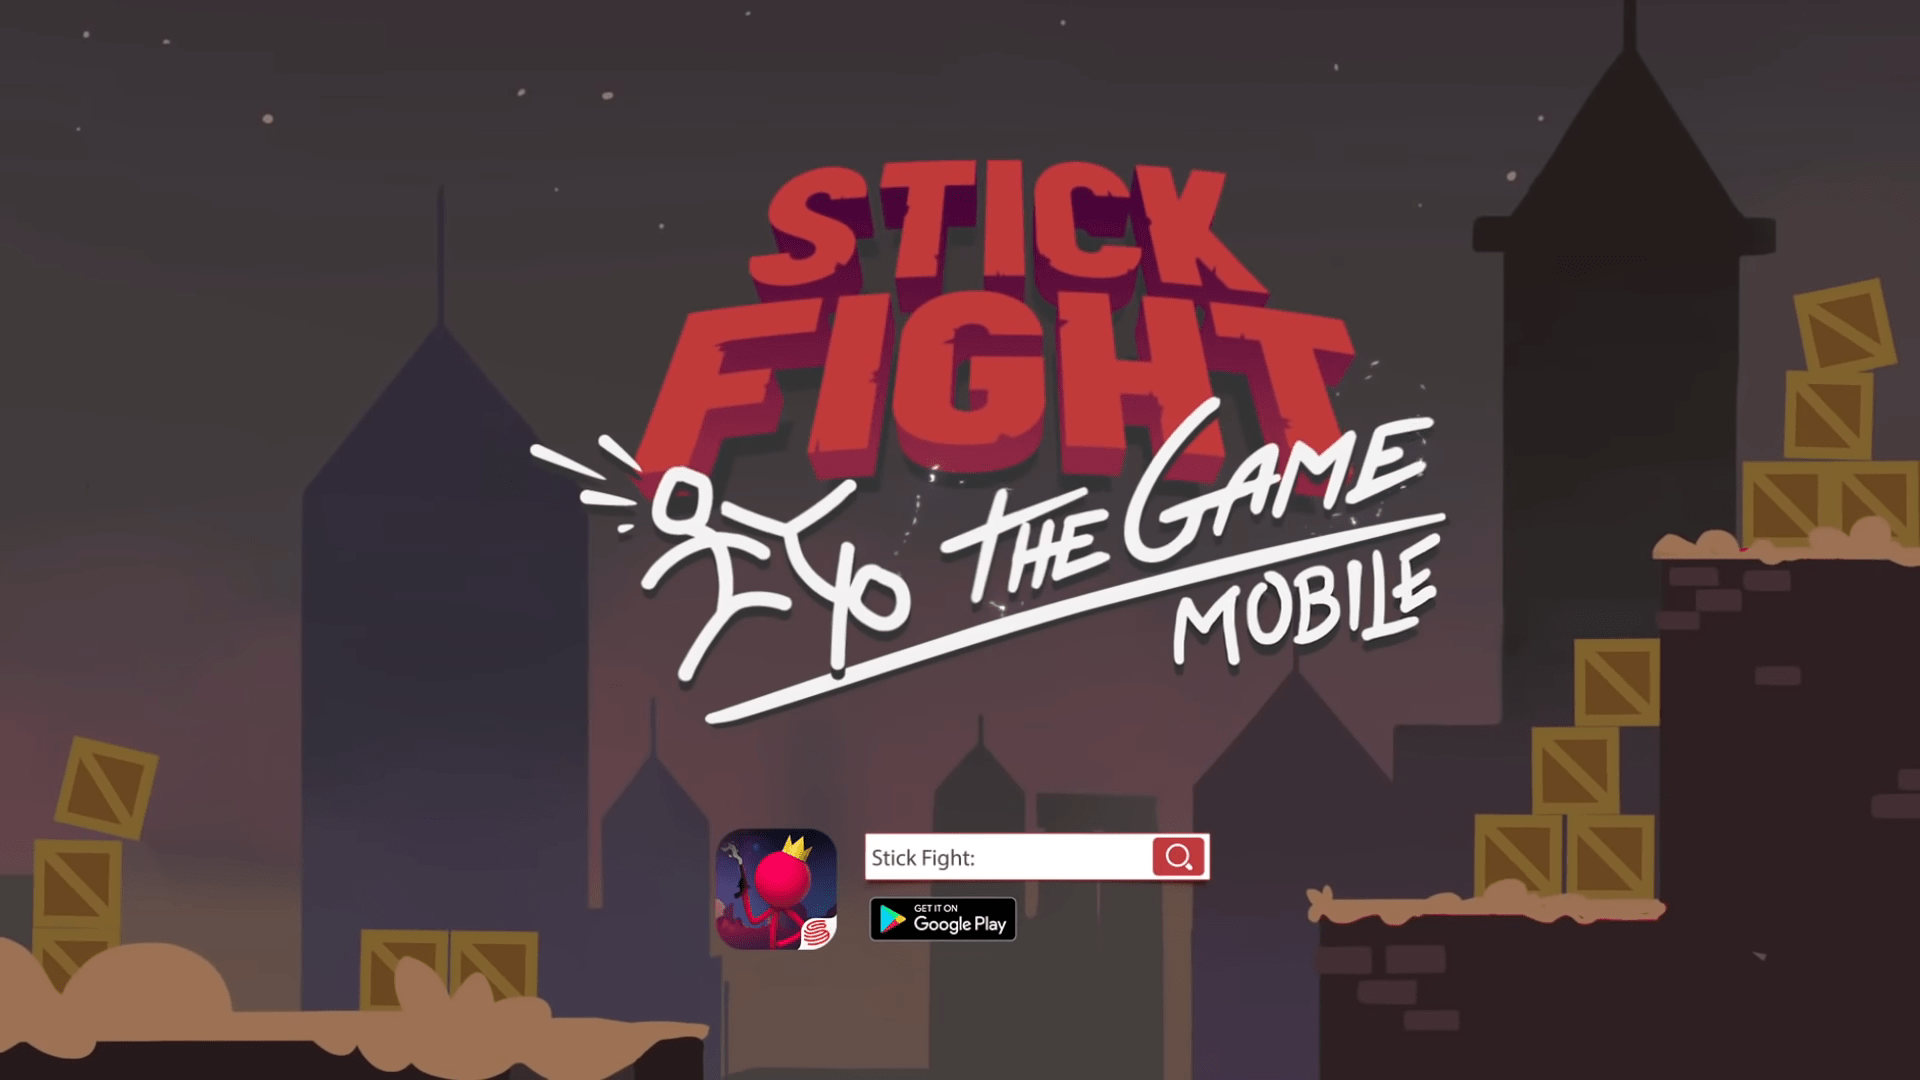 stick fight the game switch